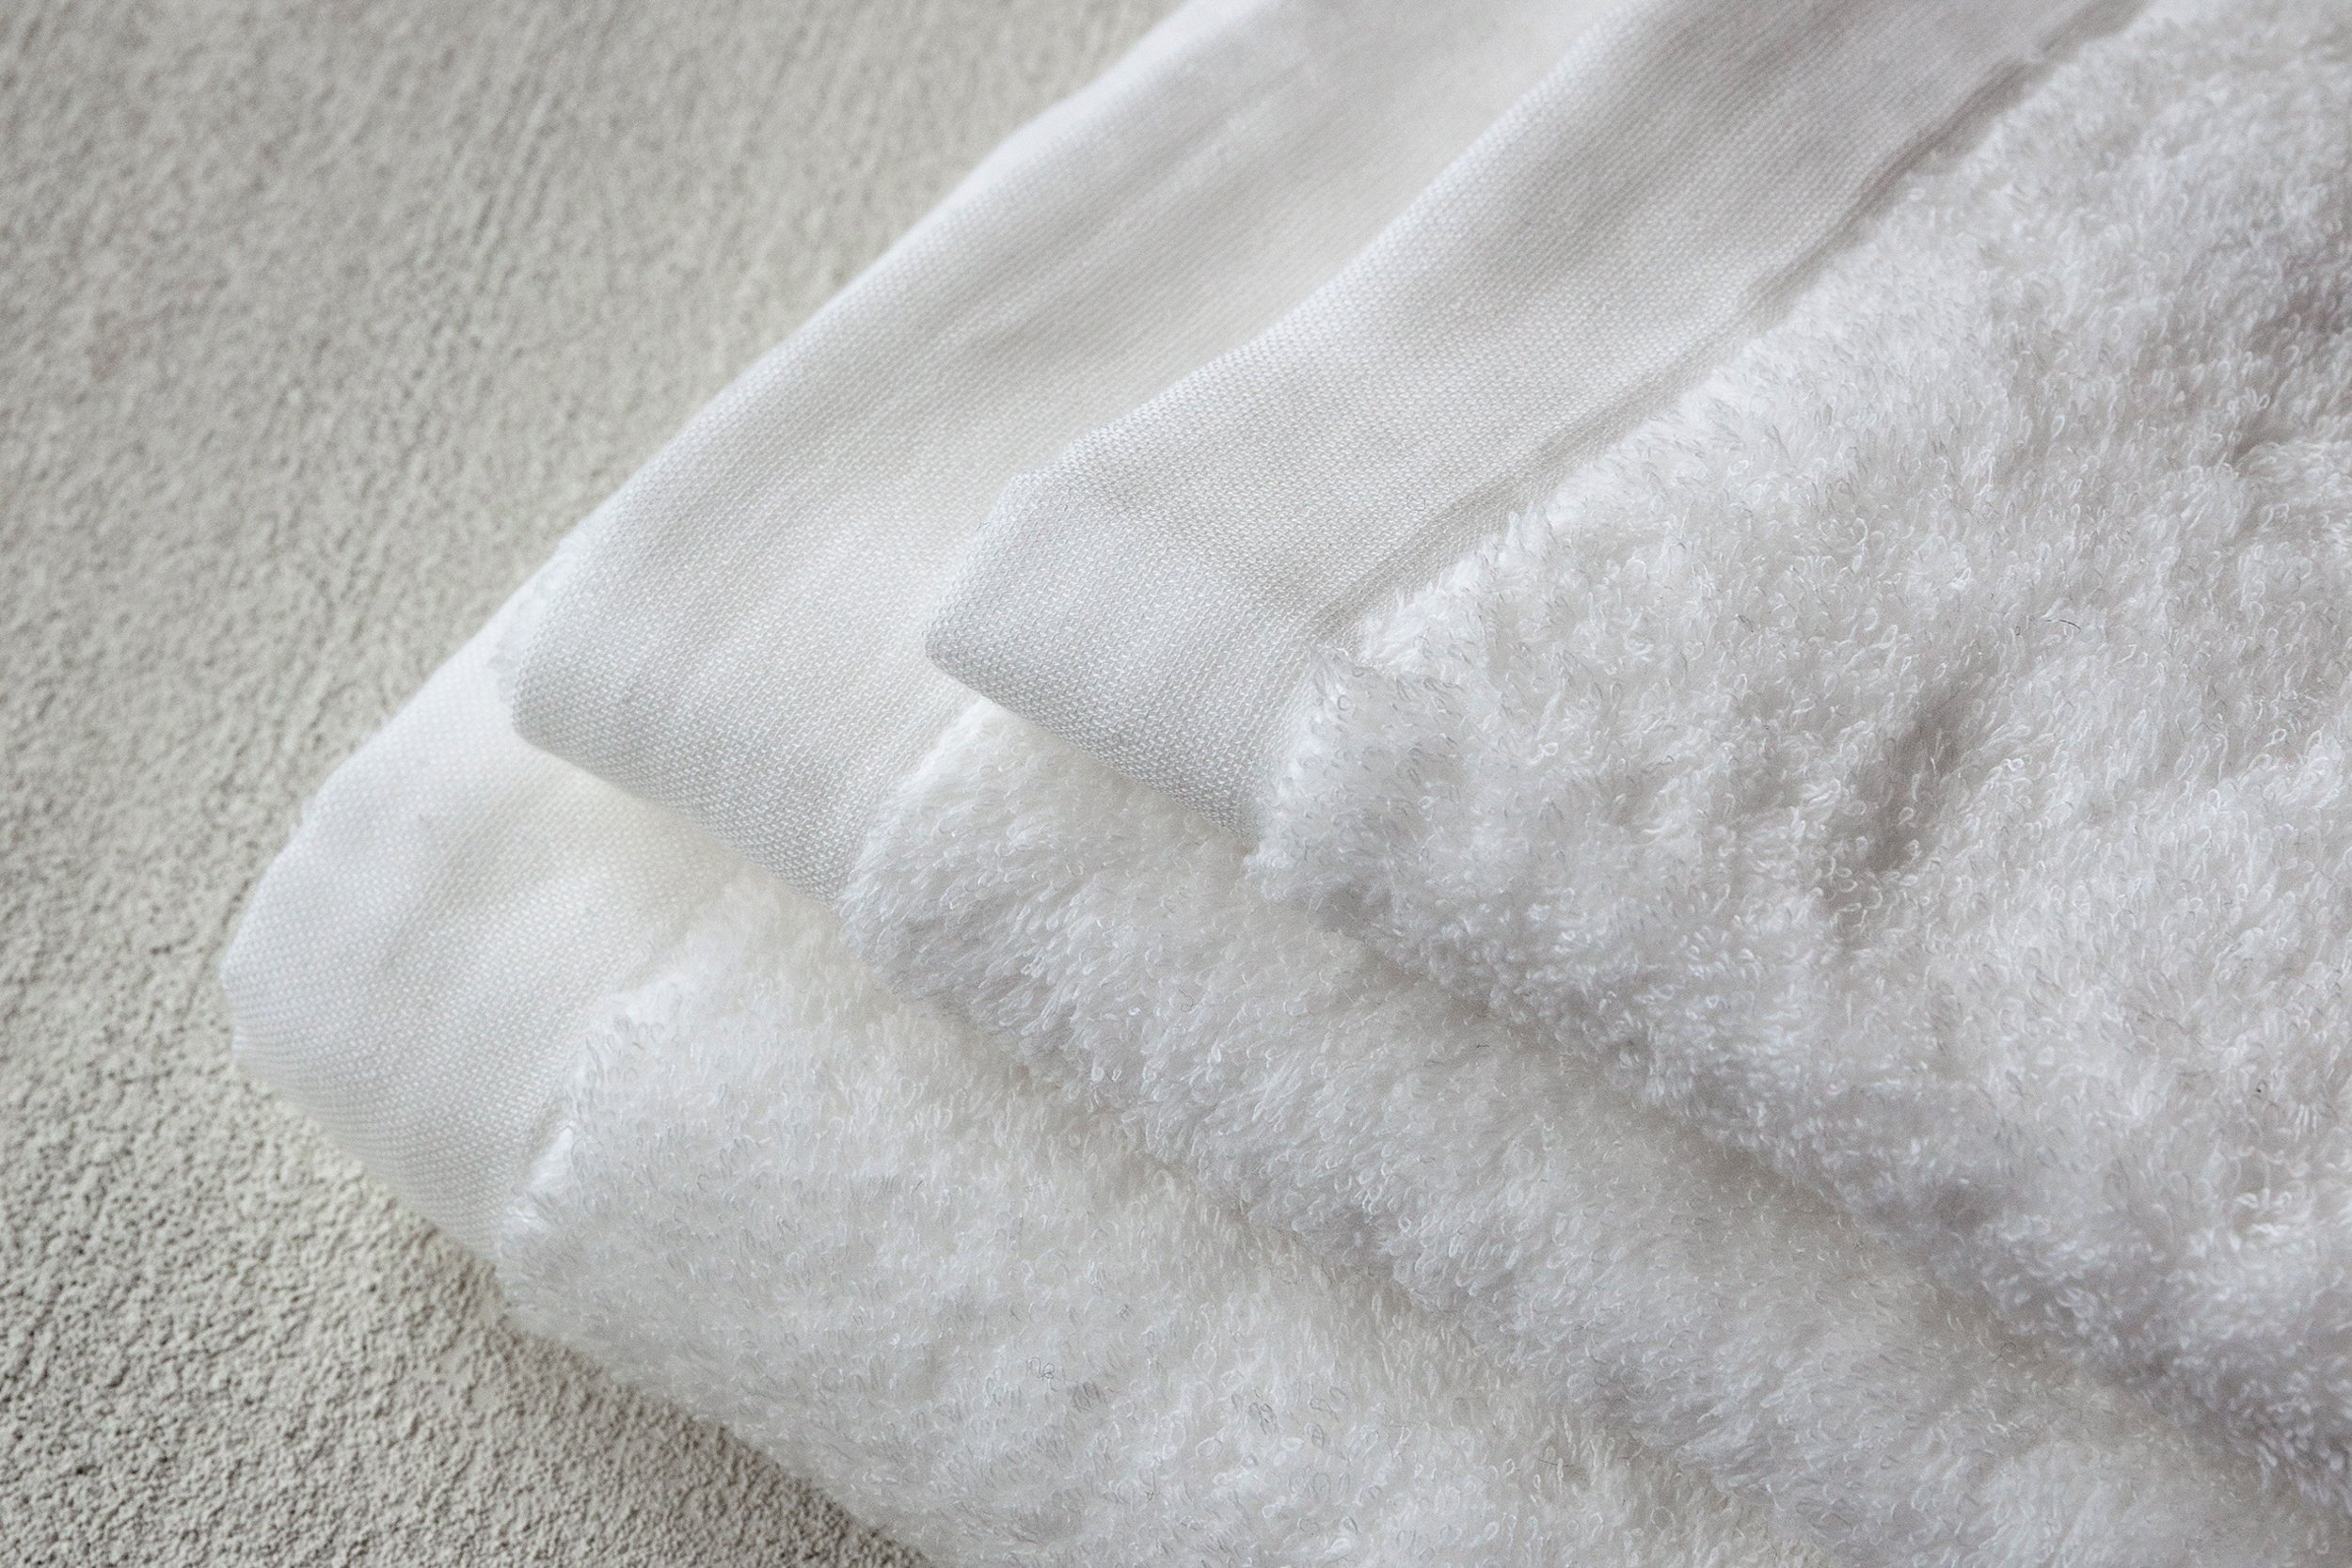 Onsen towel review